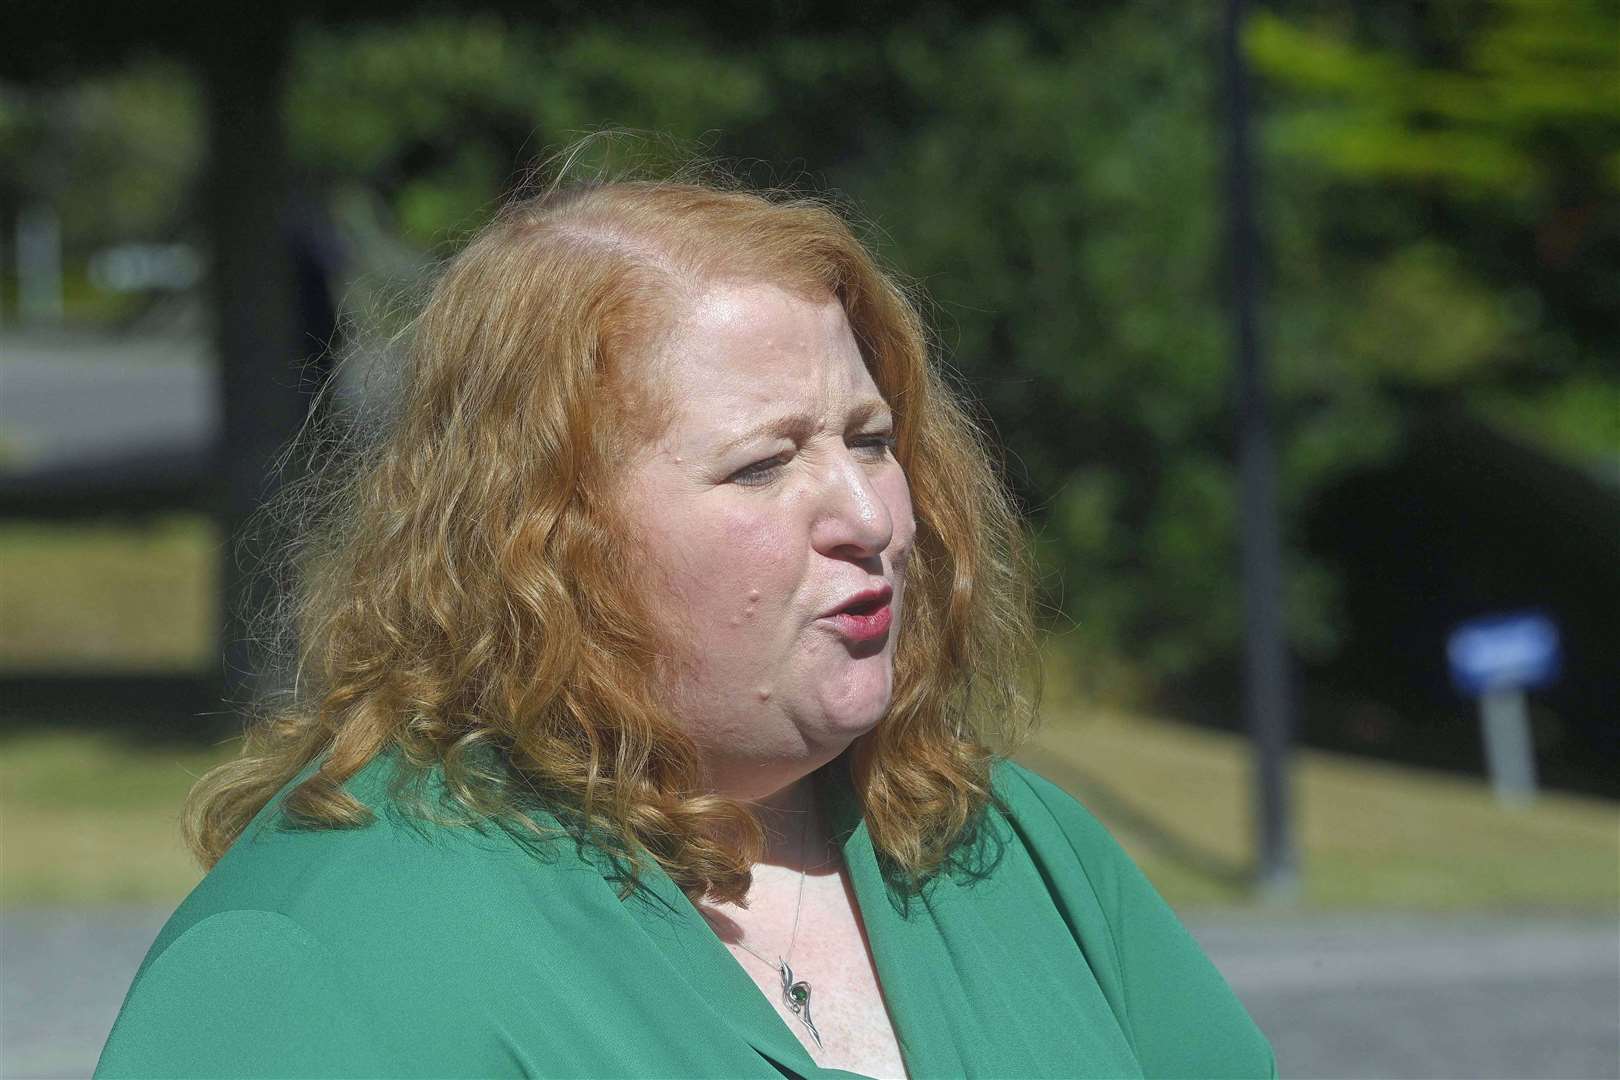 Alliance Party Leader Naomi Long said the new PM had a window of opportunity to make her mark in NI (Mark Marlow/PA)